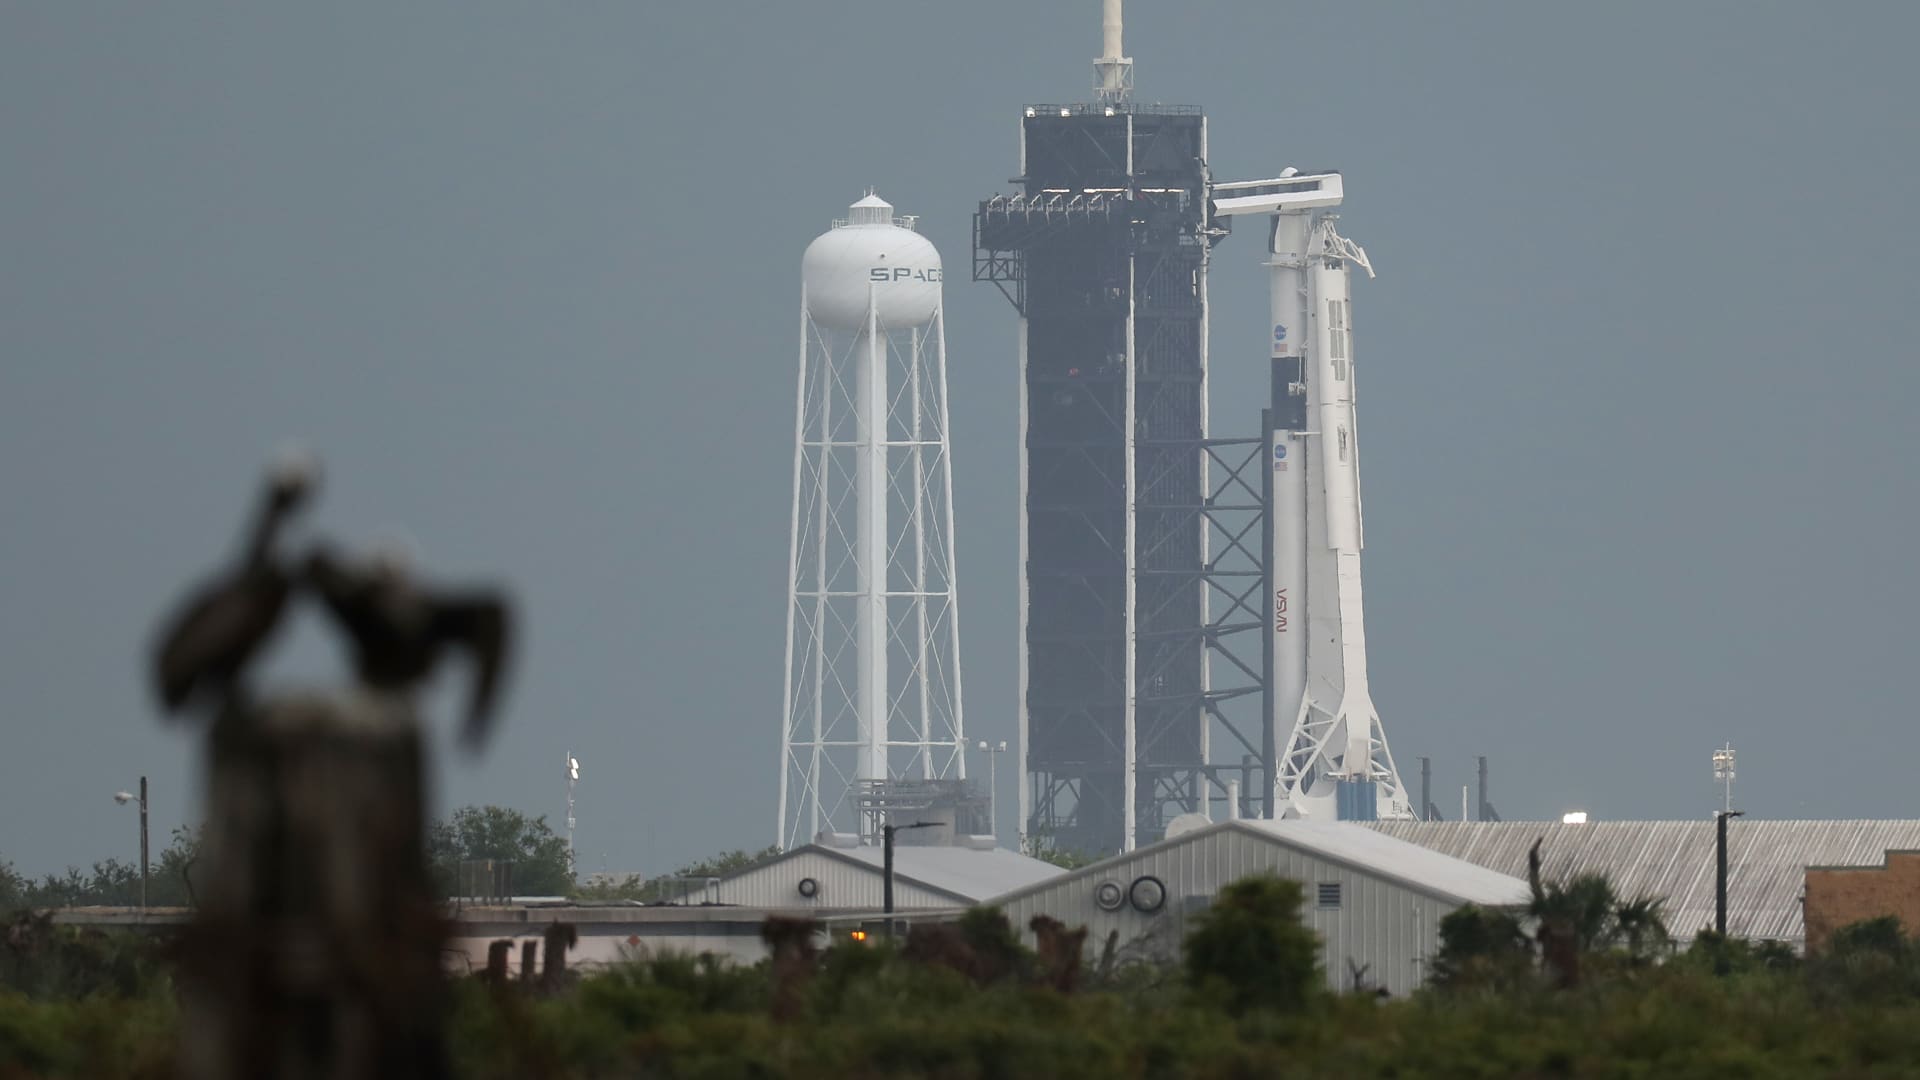 The SpaceX Falcon 9 rocket with the Crew Dragon spacecraft attached sits on launch pad 39A at the Kennedy Space Center on May 27, 2020 in Cape Canaveral, Florida.